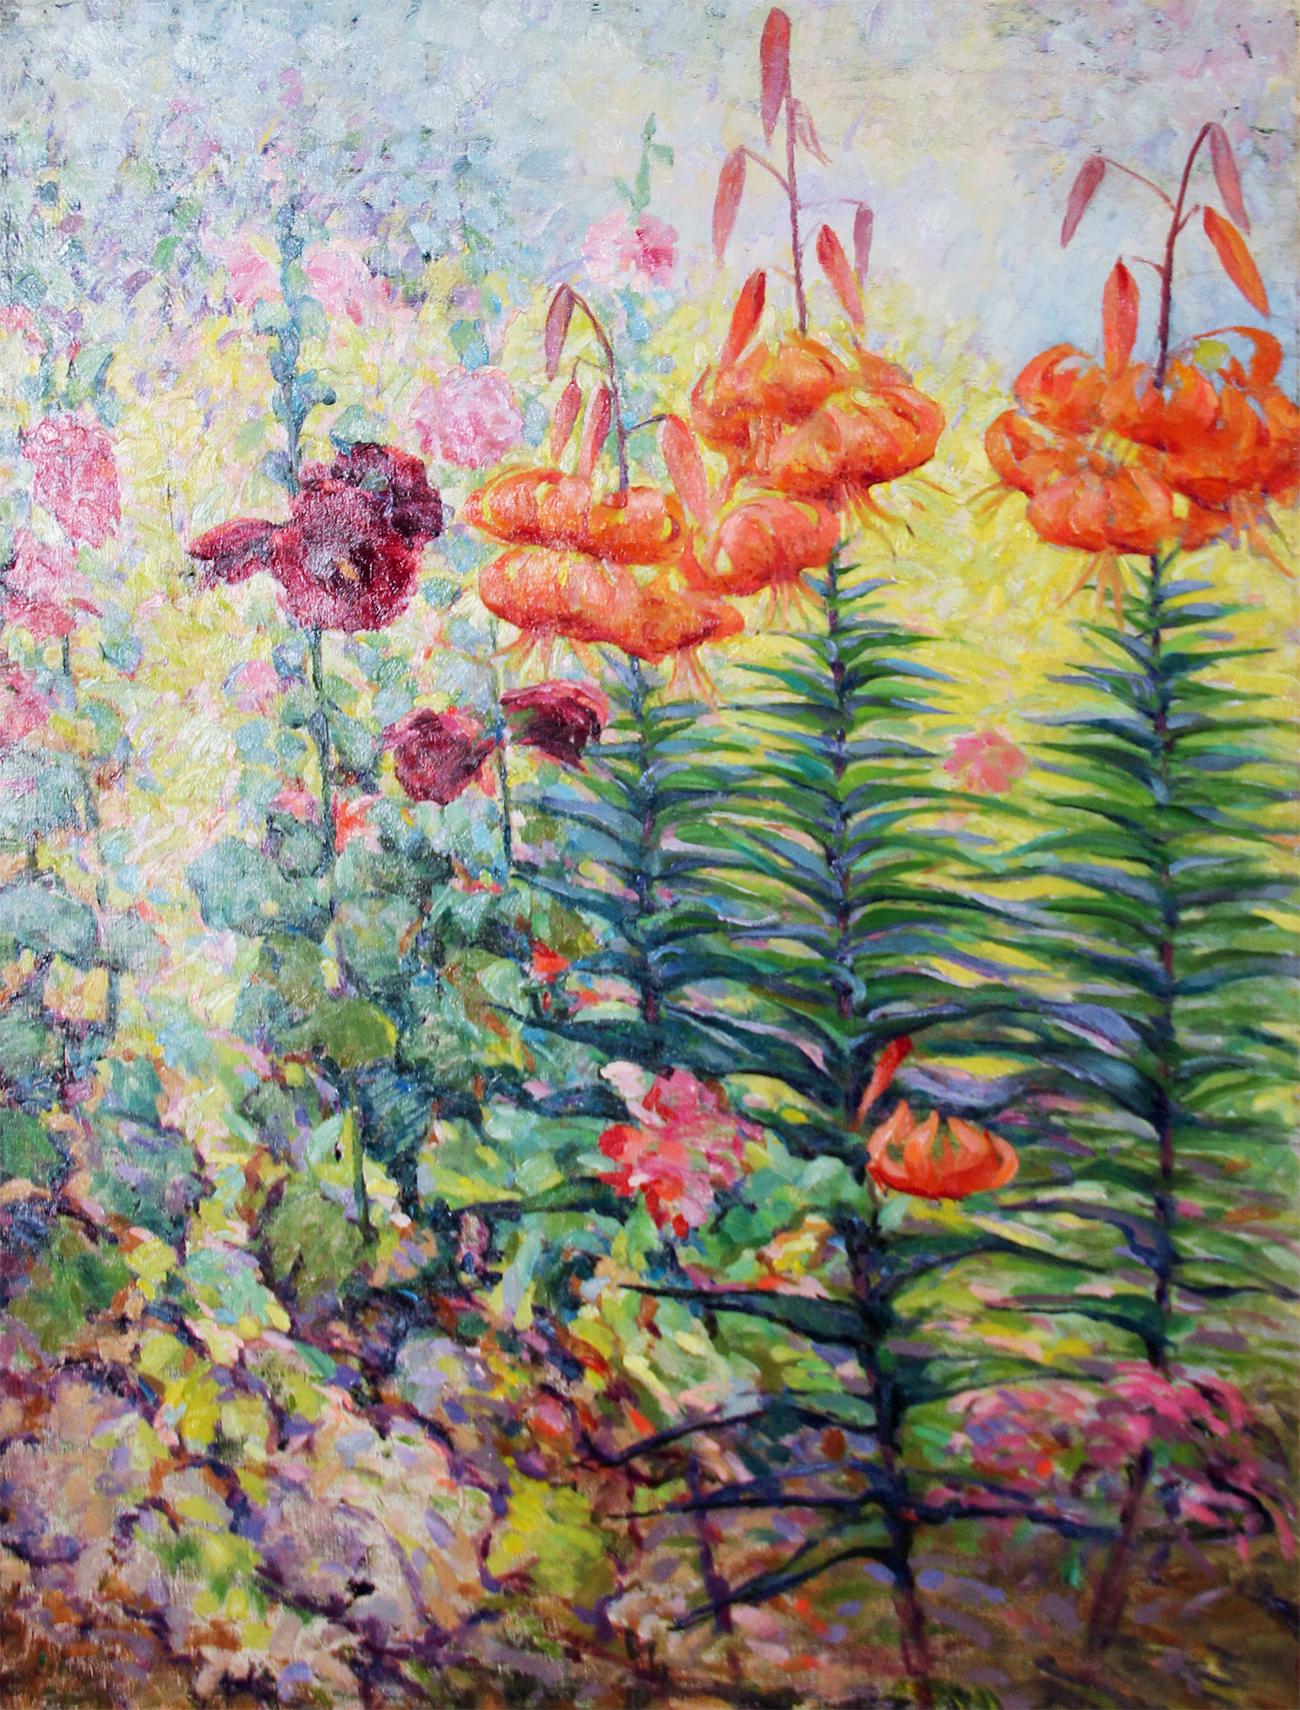 Tiger Lillies, American Impressionist Floral Landscape, Oil on Canvas, Framed - Painting by Henry Ryan MacGinnis